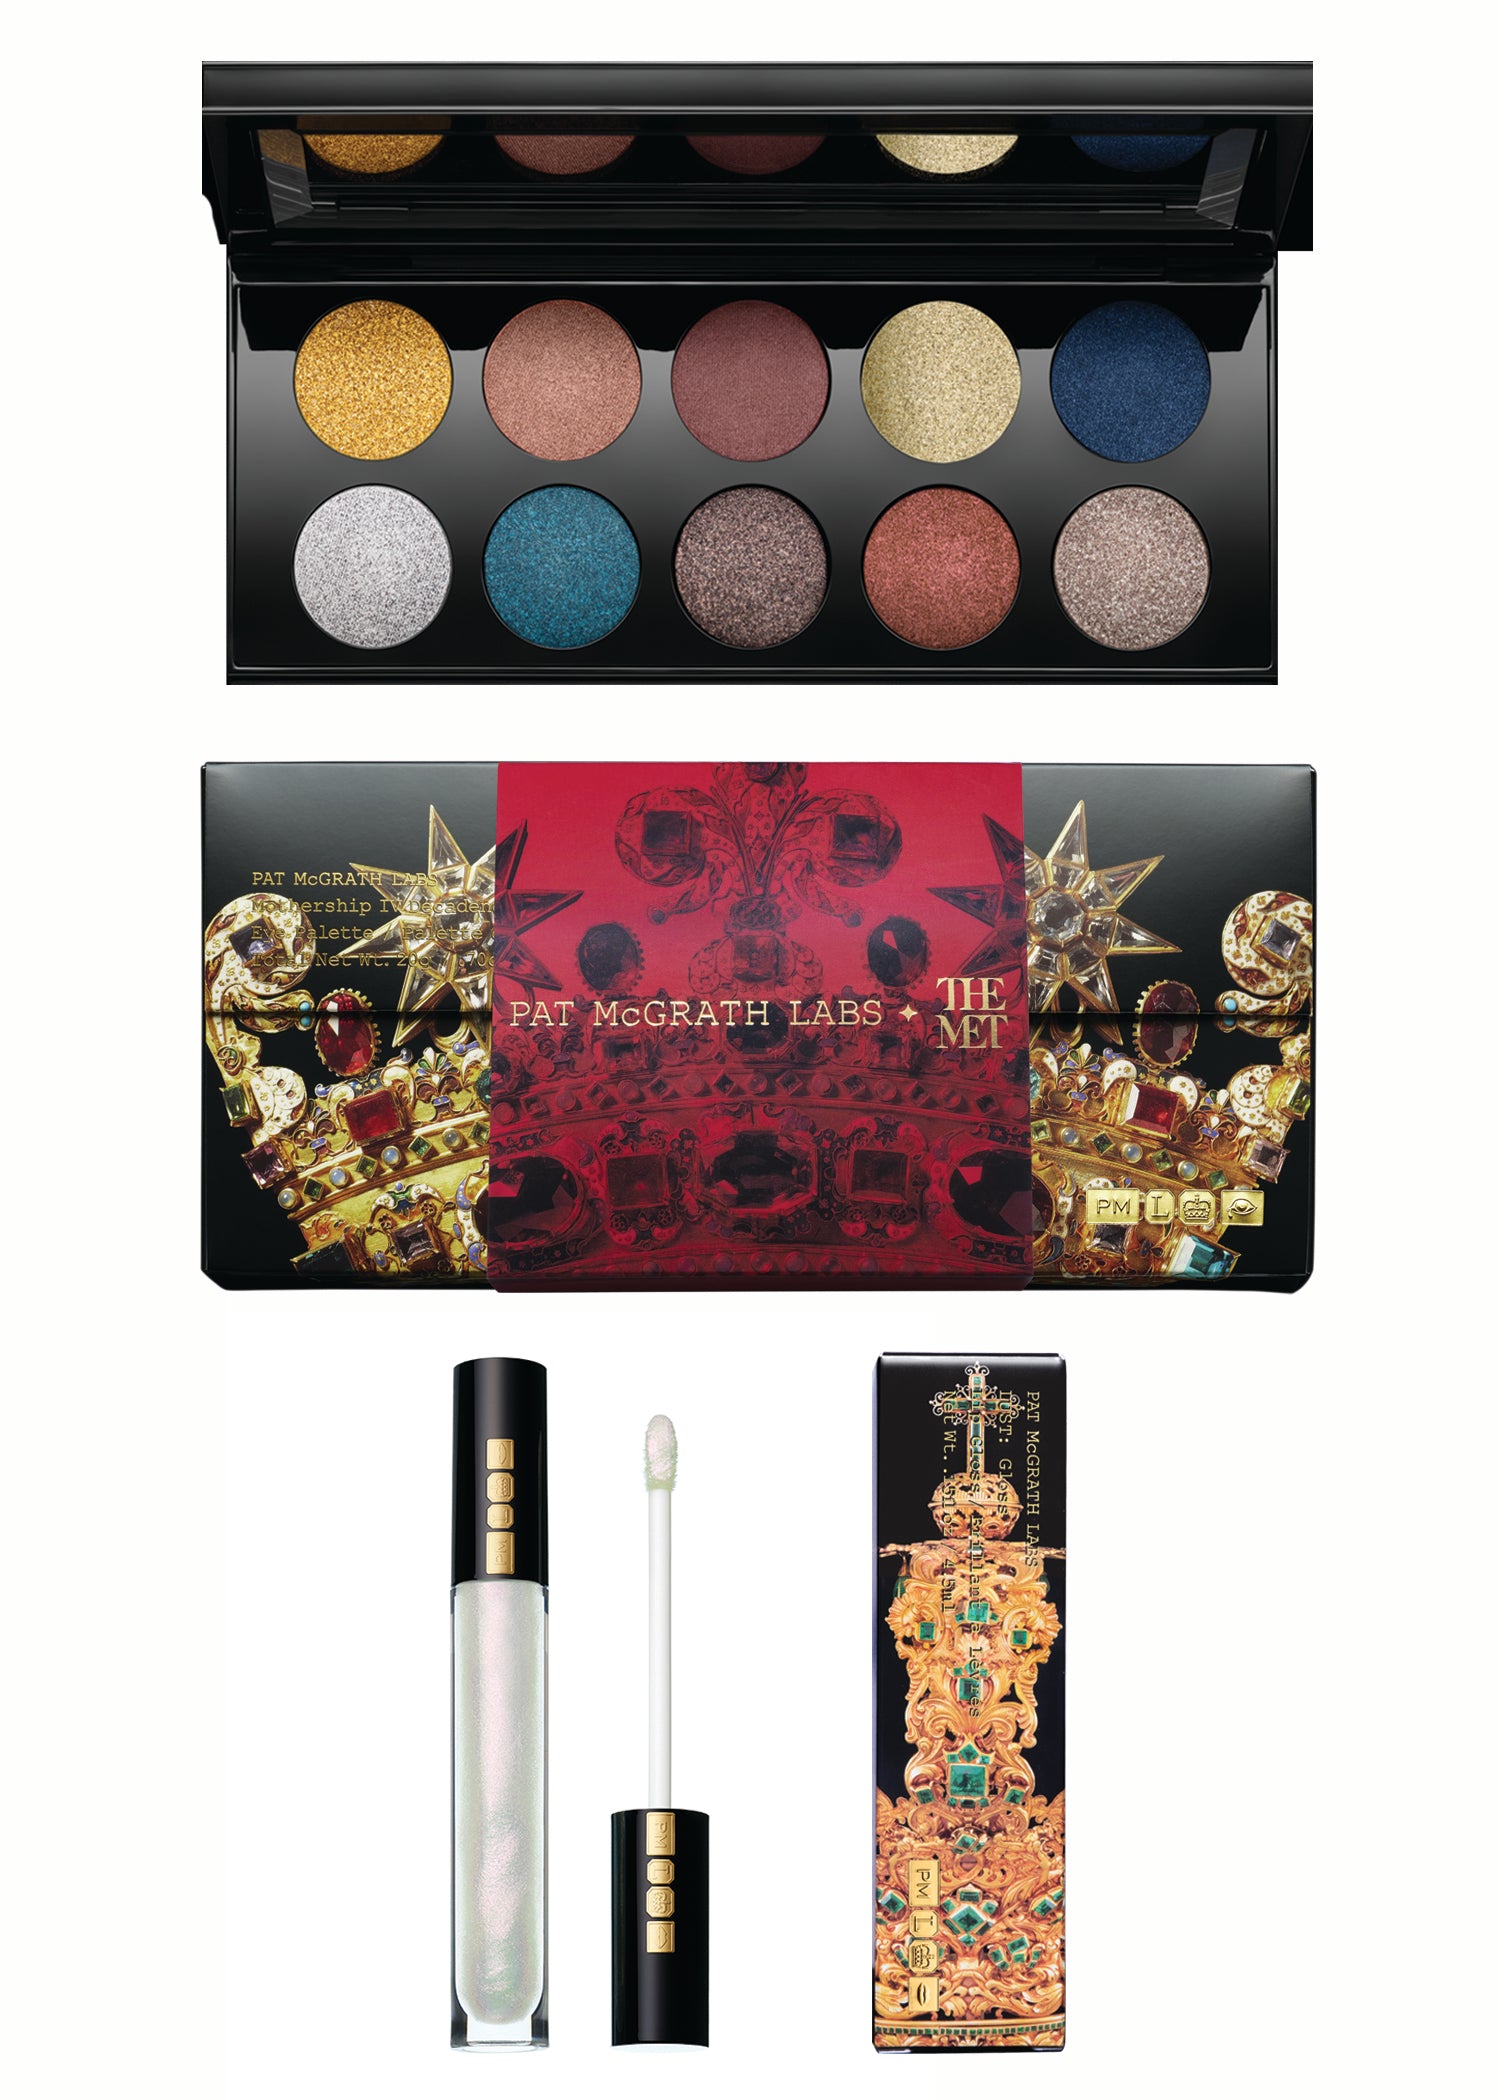 Review, Swatches, Photos, Makeup, Fashion Trends 2018, 2019, 2020: Best Eyeshadow Palettes, Pat McGrath, Mothership IV: Decadence, Lust Gloss, Apparel at The Met Store